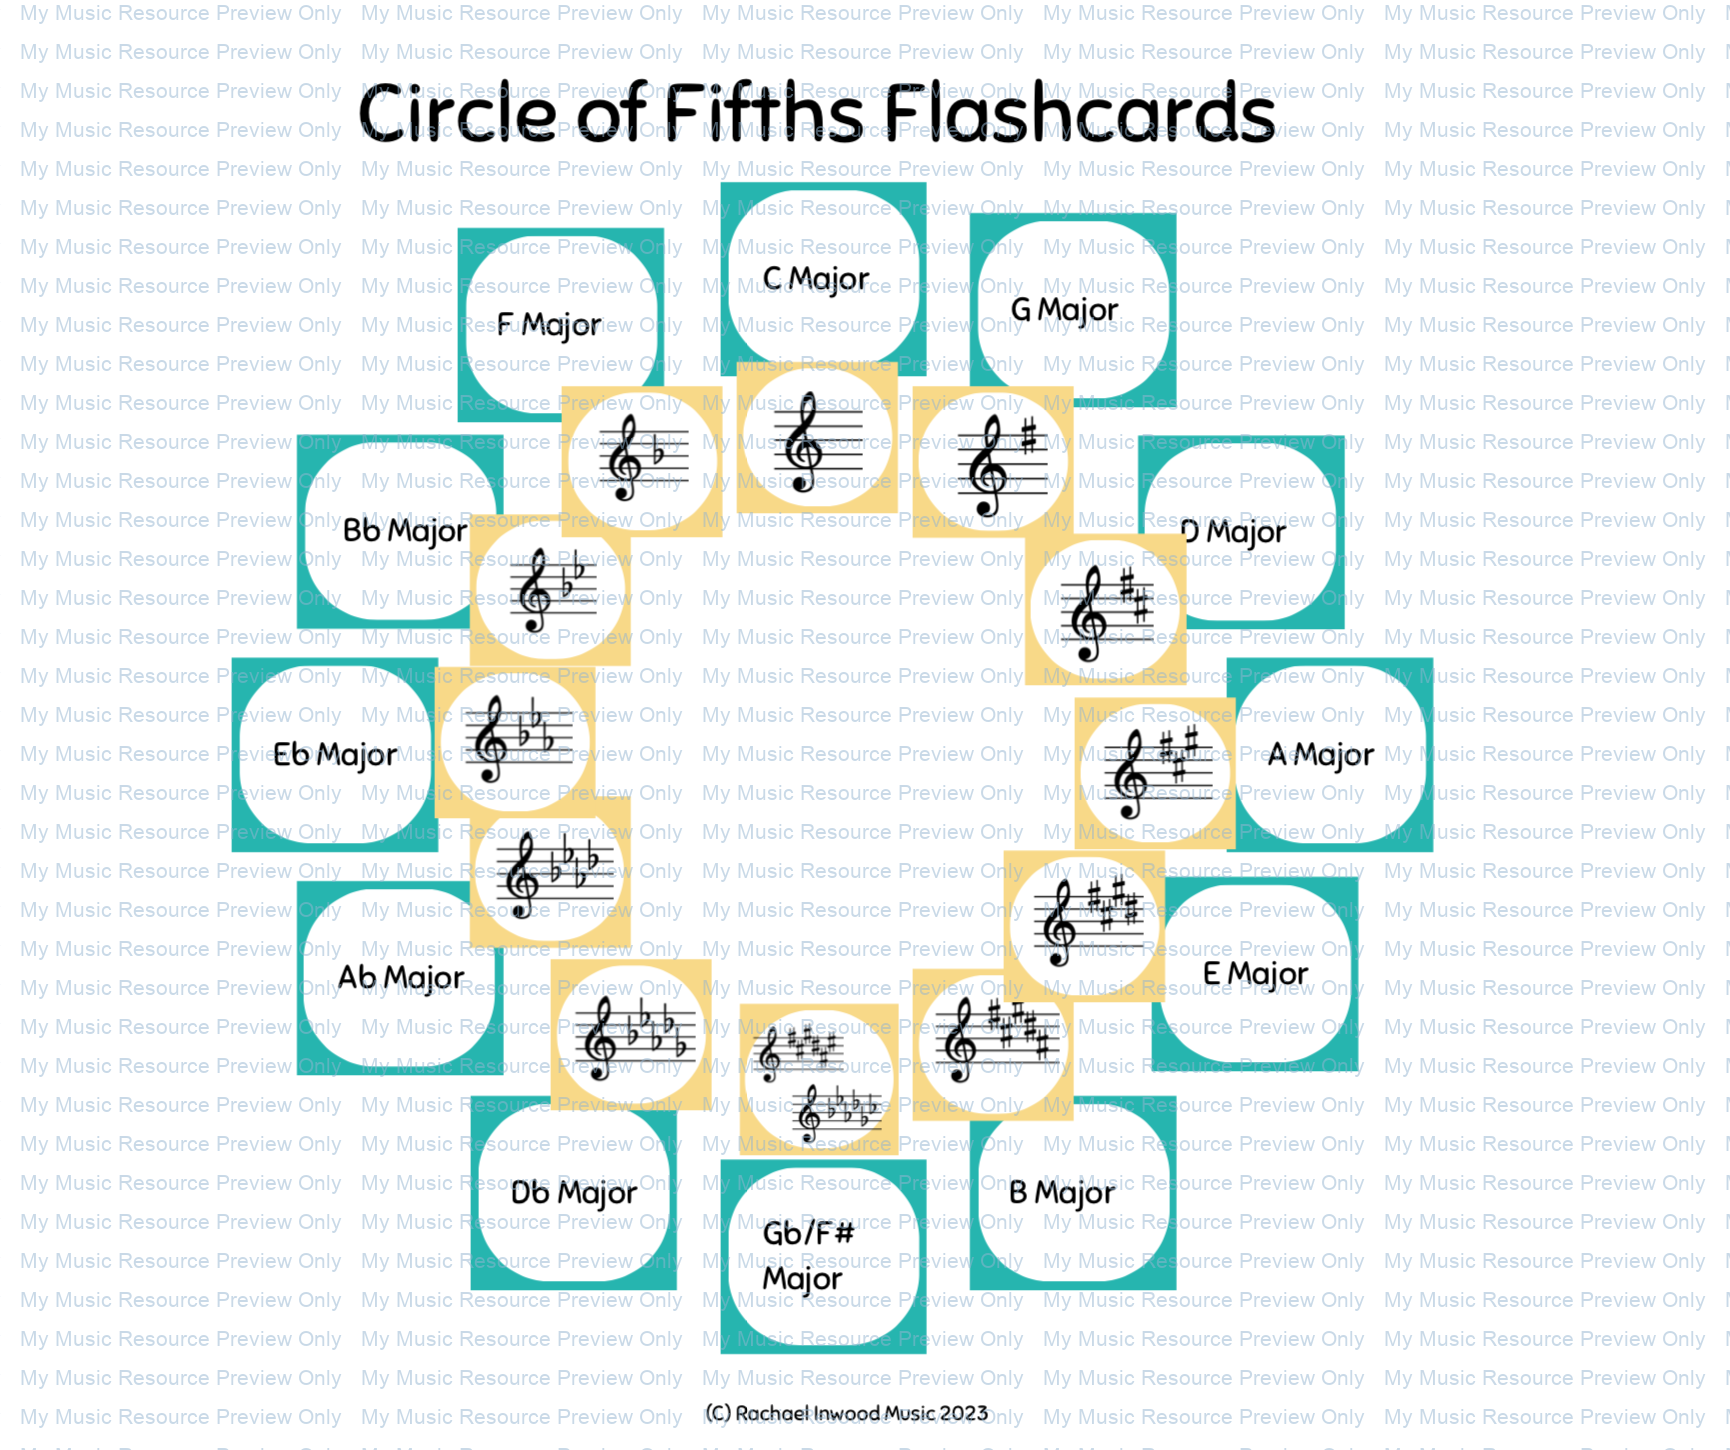 Circle of Fifths Flashcards